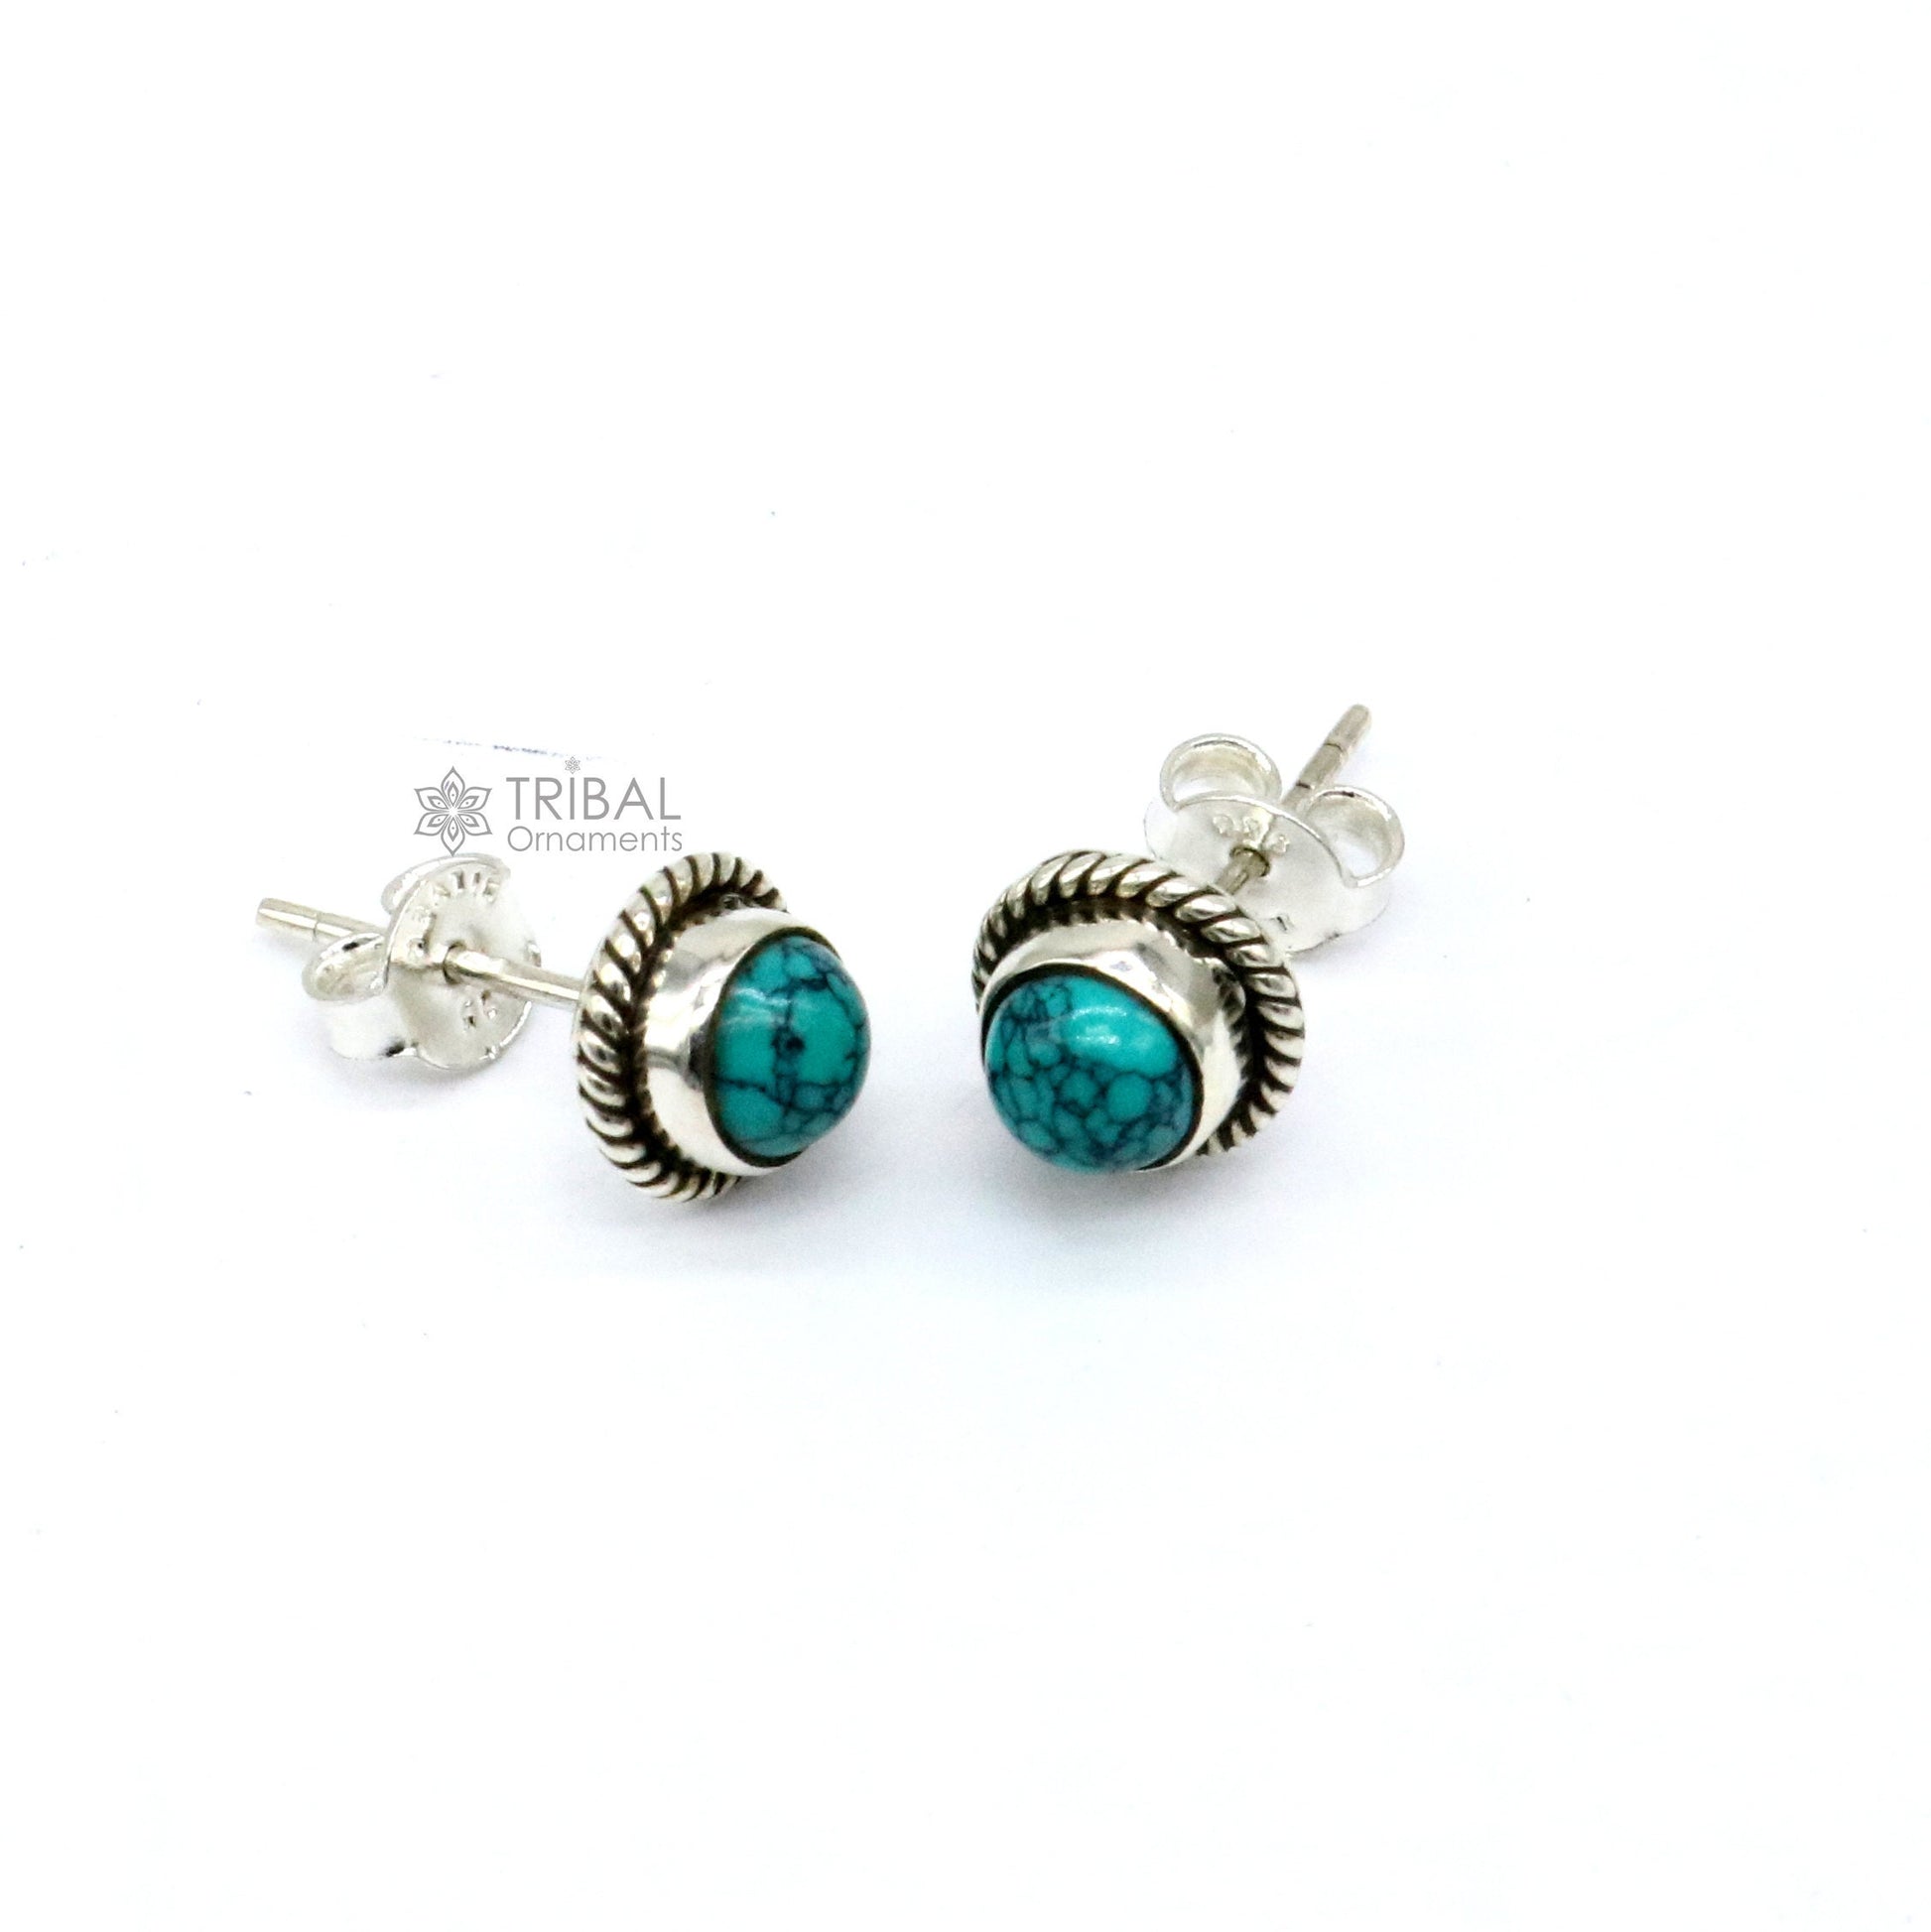 925 sterling silver handmade stud earring with gorgeous single blue turquoise stone stud earring best unisex jewelry s1280 - TRIBAL ORNAMENTS